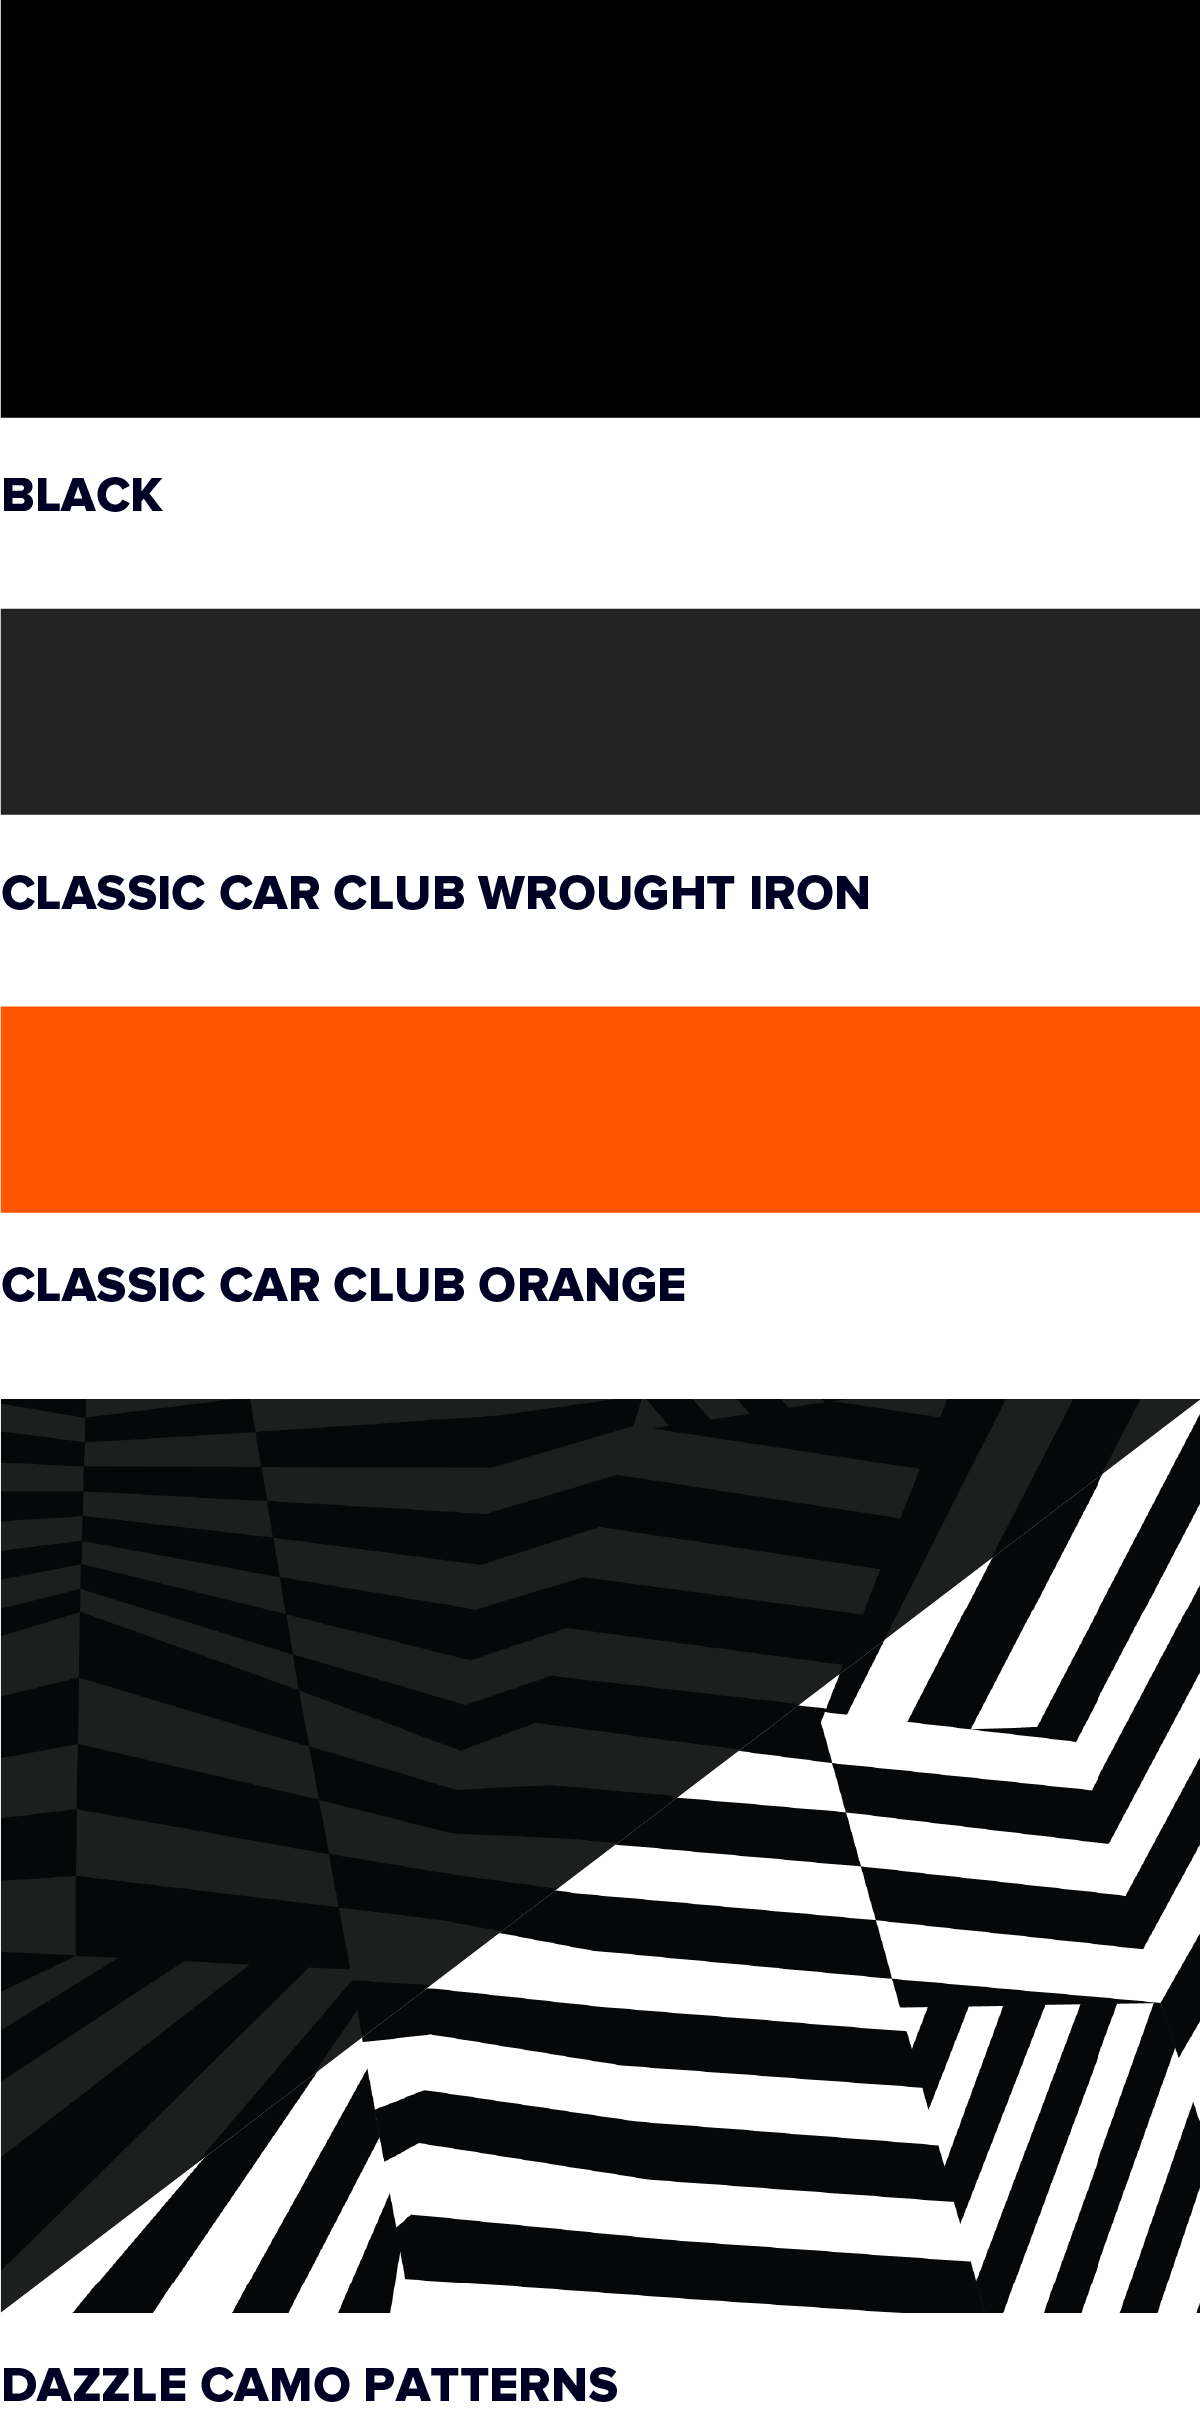 Classic Car Club’s color palette consisting of black, wrought iron, and orange.